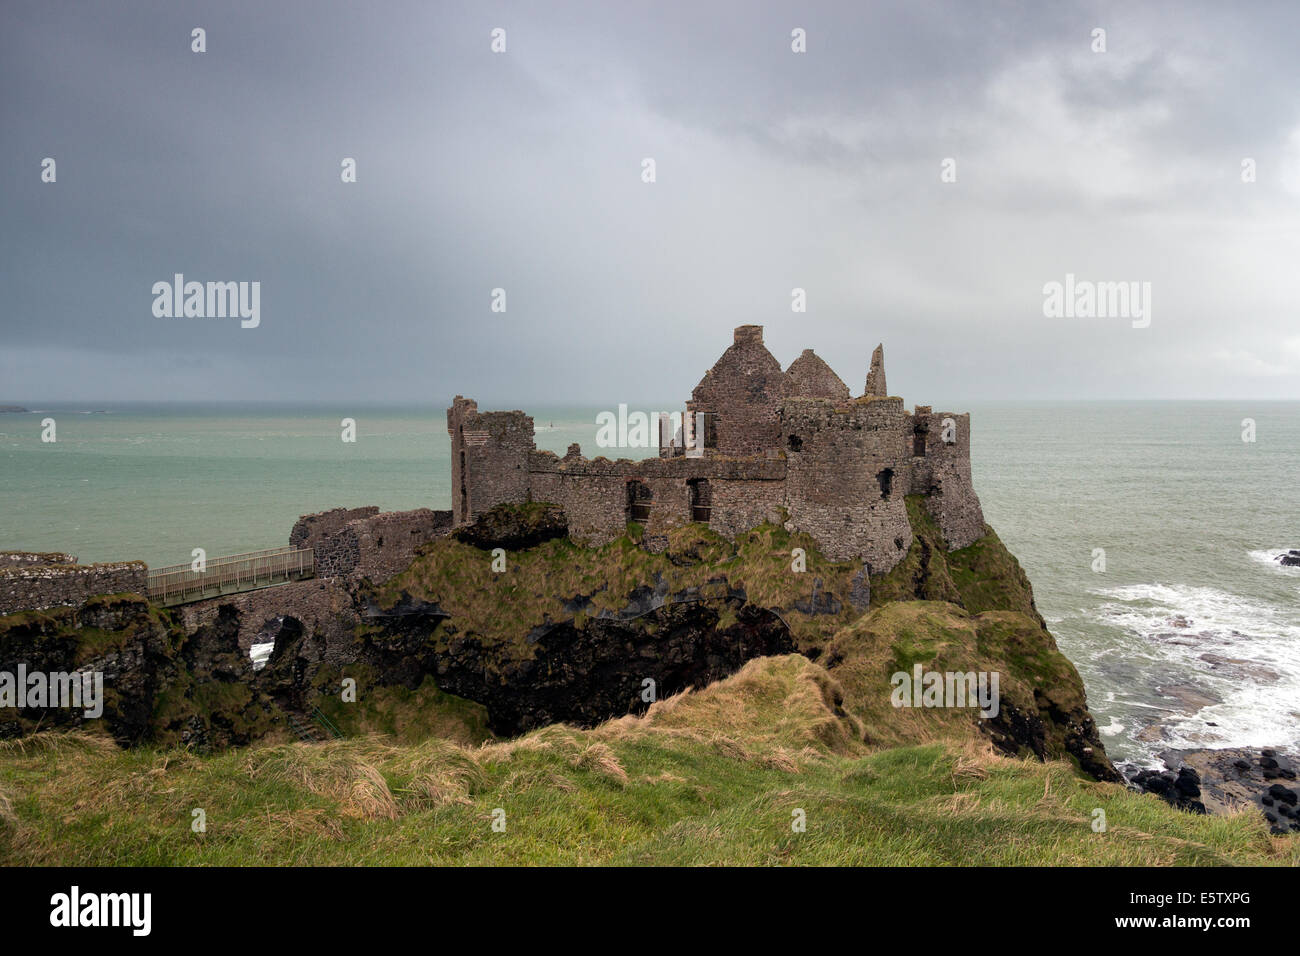 Dunluce castle, a ruined medieval castle in Northern Ireland Stock Photo